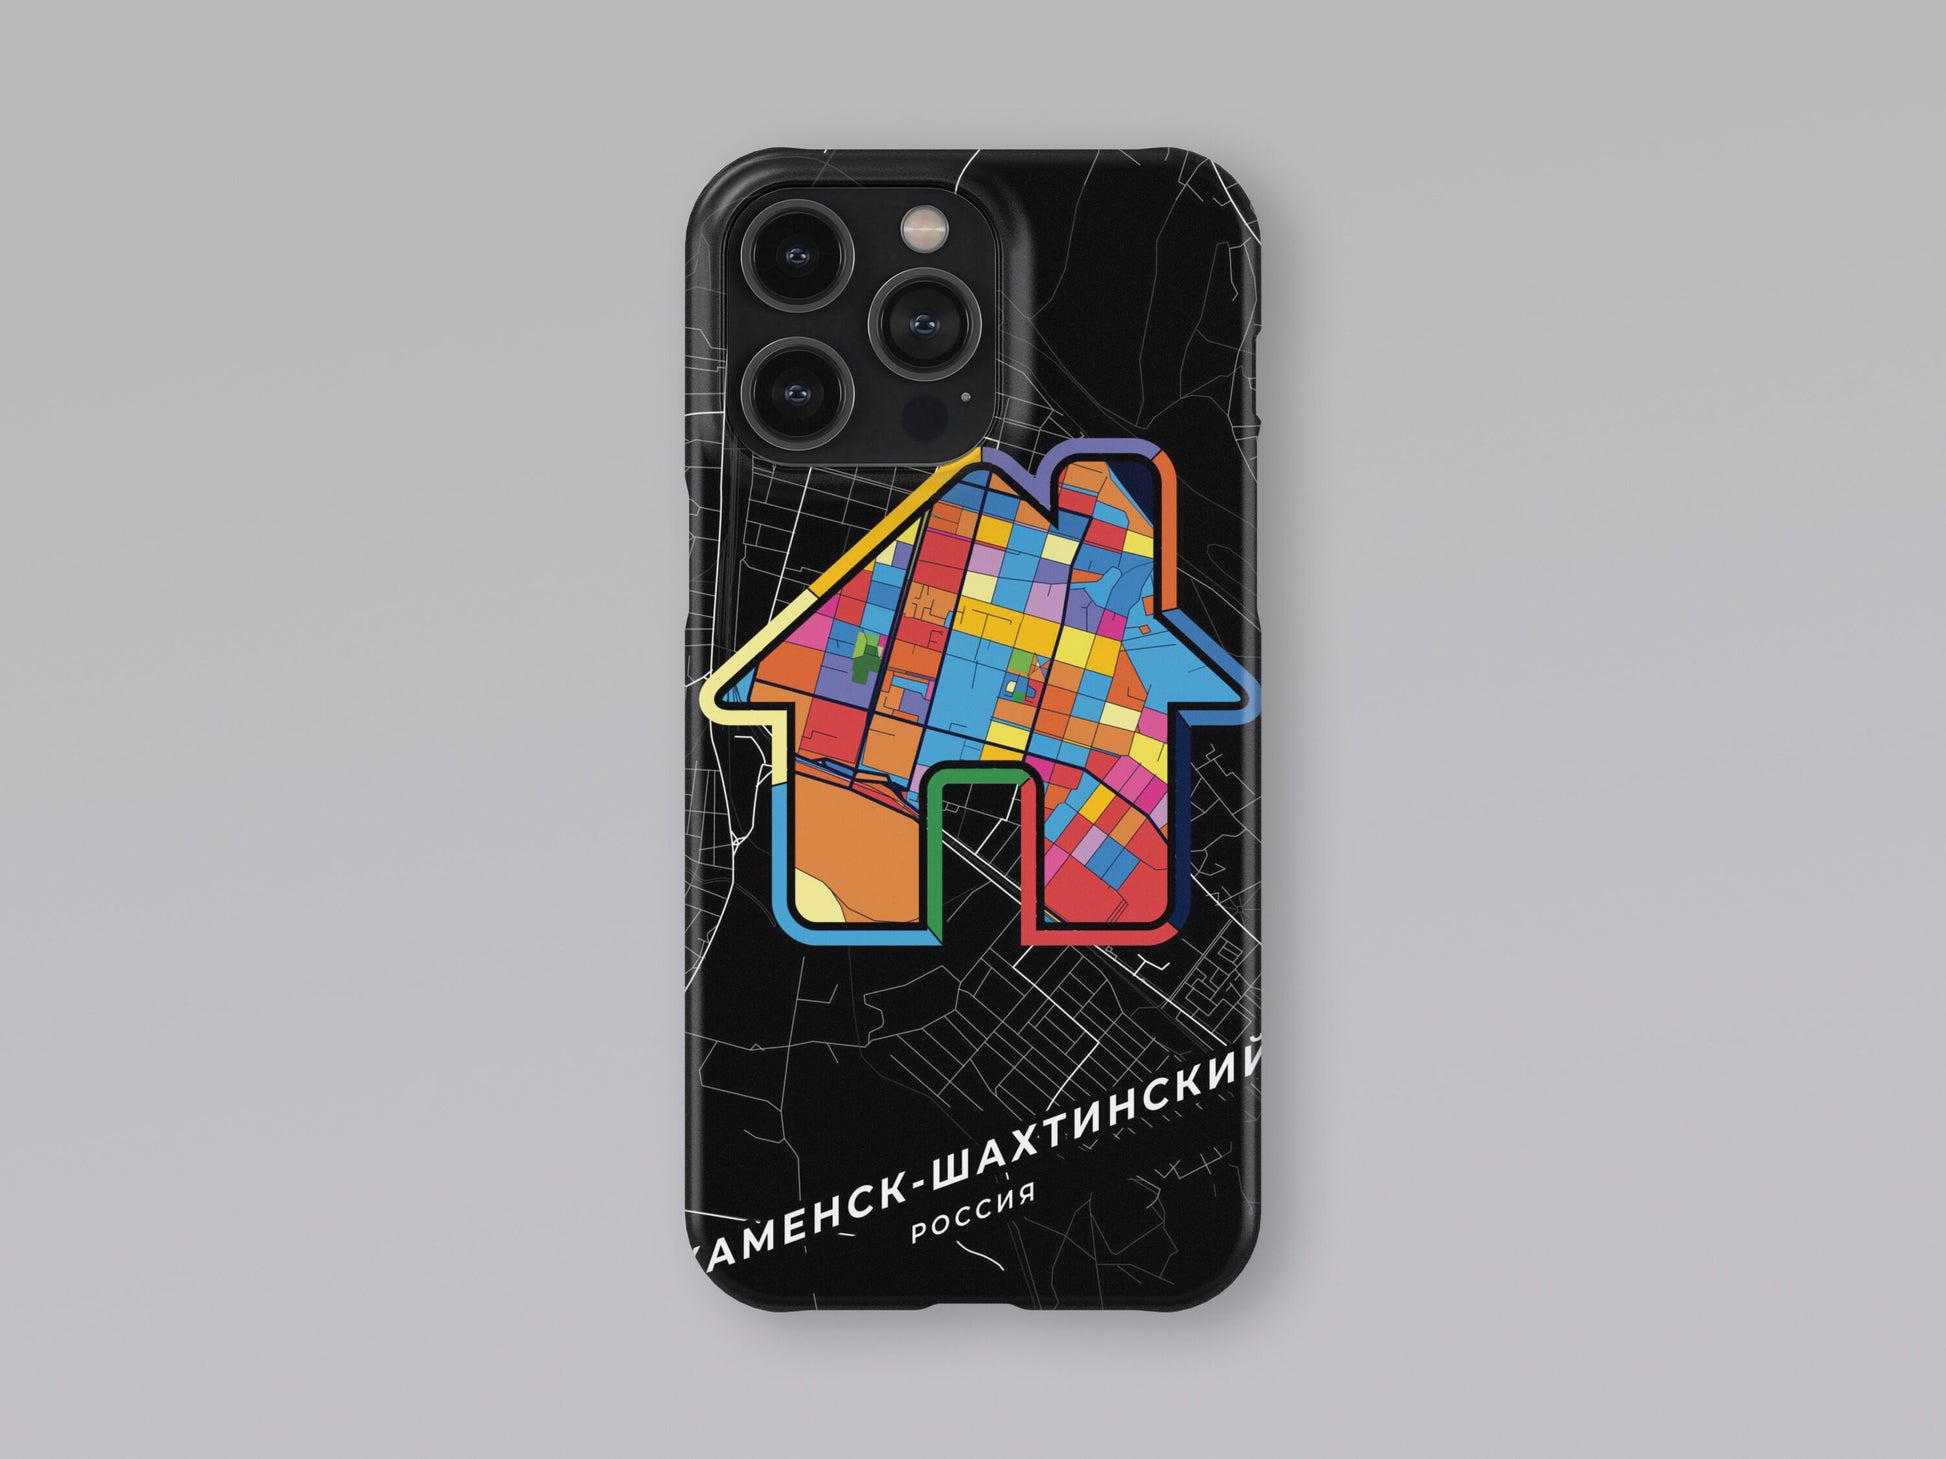 Kamensk-Shakhtinsky Russia slim phone case with colorful icon. Birthday, wedding or housewarming gift. Couple match cases. 3